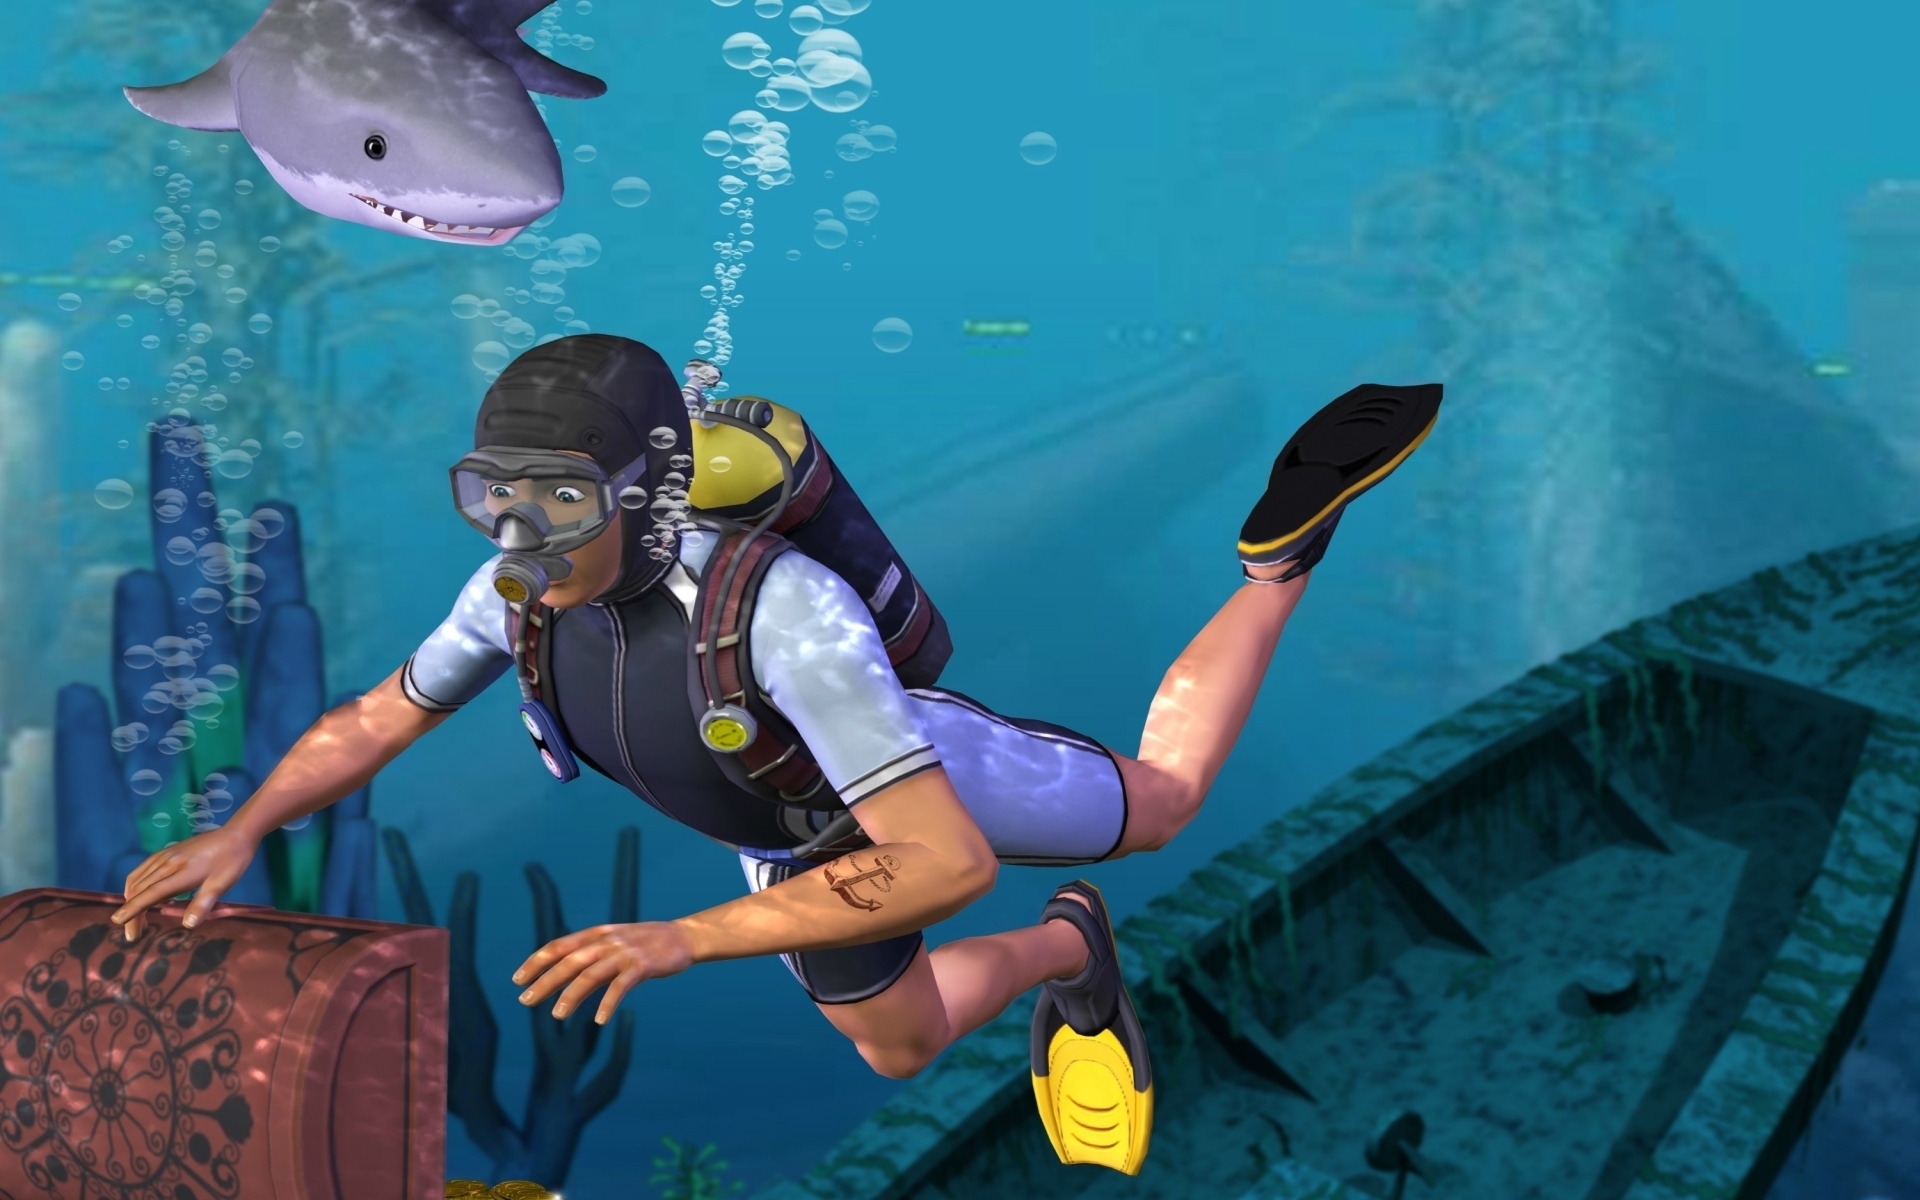 video game, the sims, blue, diver, ocean, shark, water